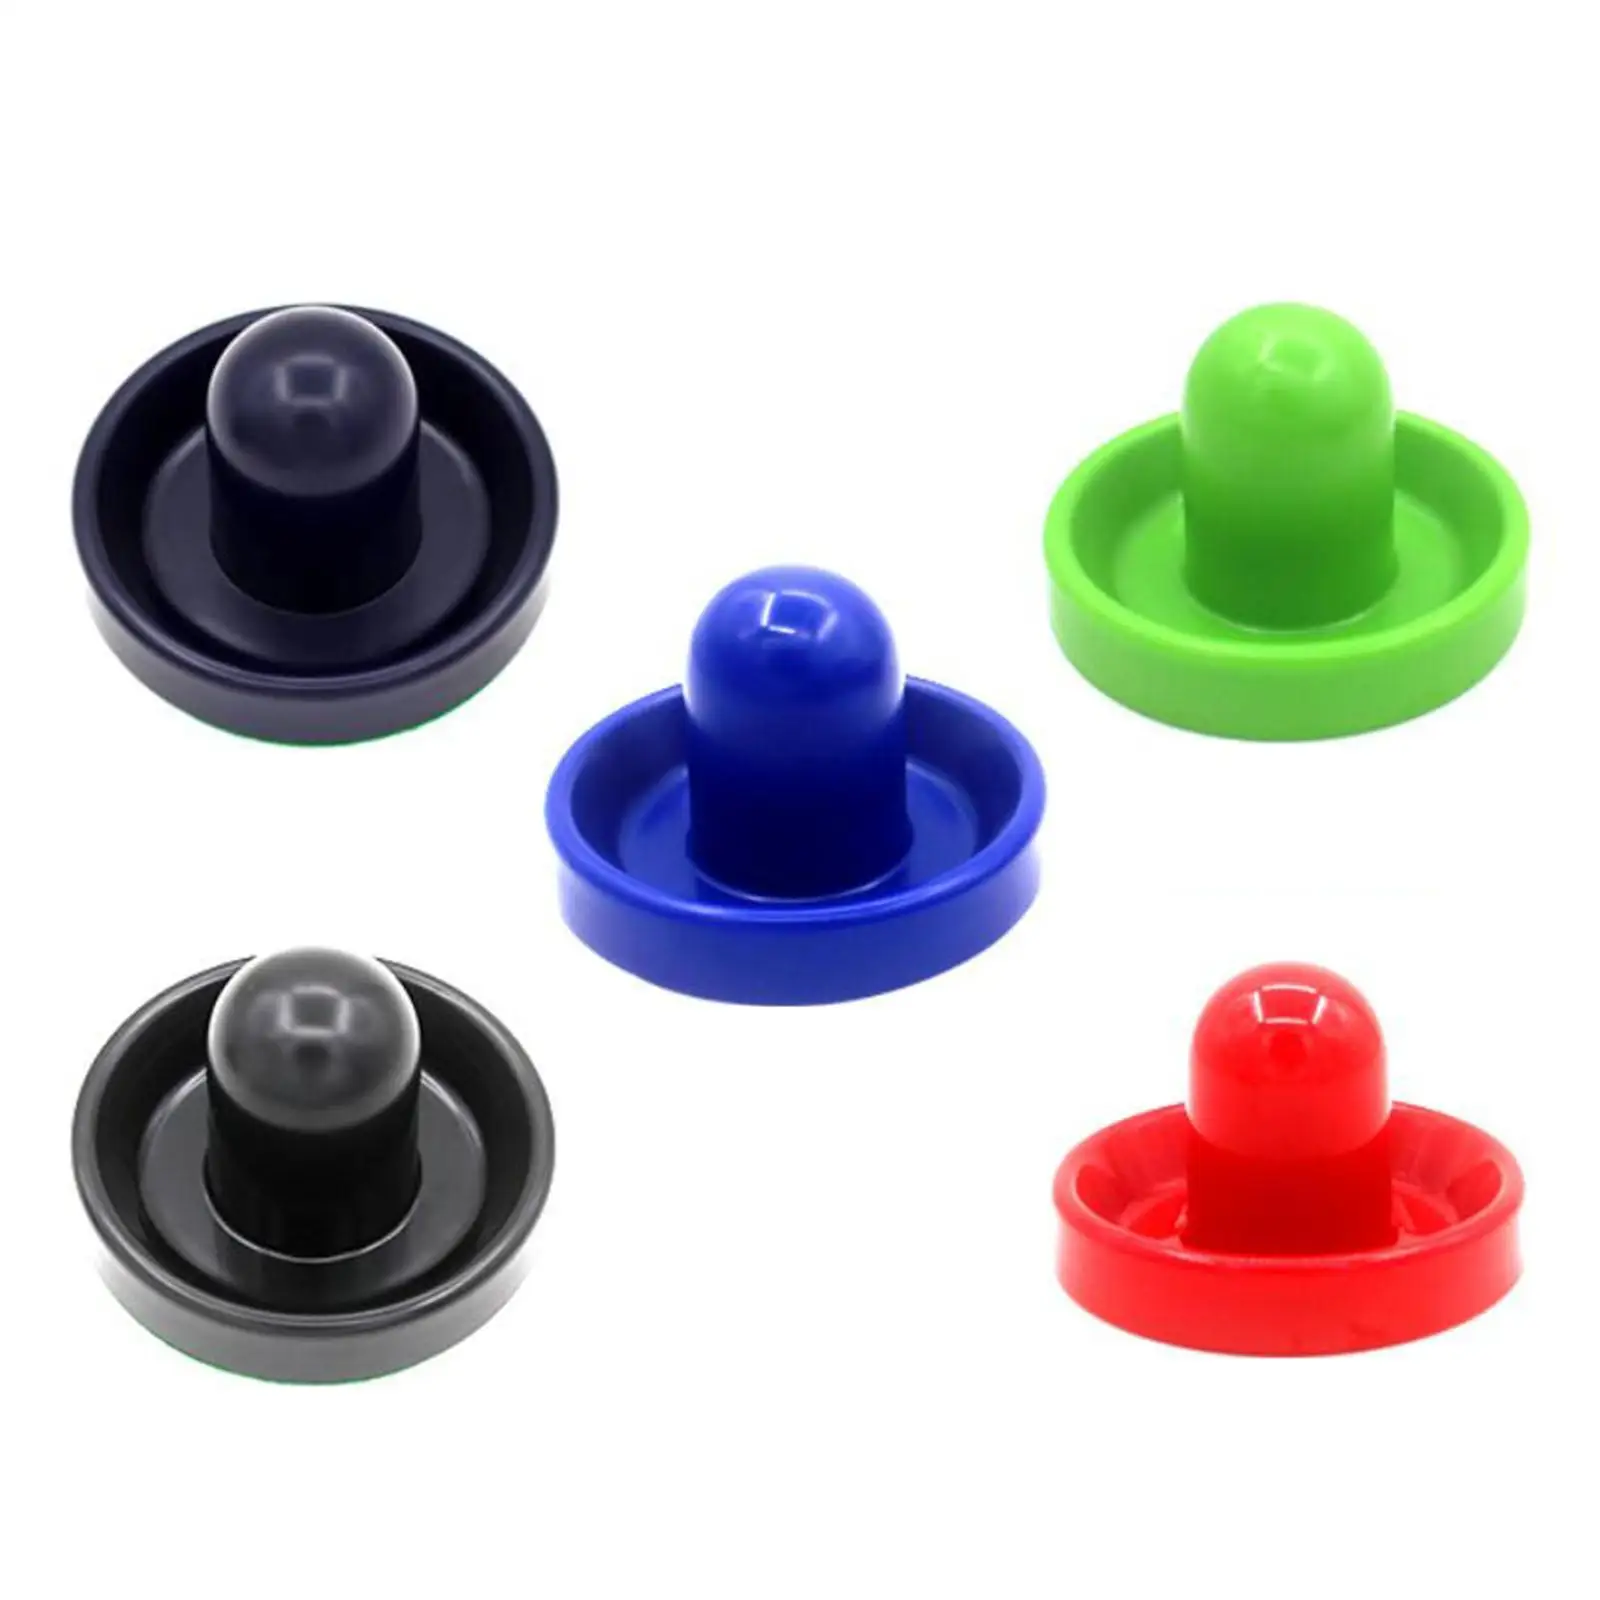 4 Colors Air Hockey Pushers and 8 Pucks Replacement with 4Pcs Felt Bottom Standard Air Hockey Pucks for Home Game Tables Family